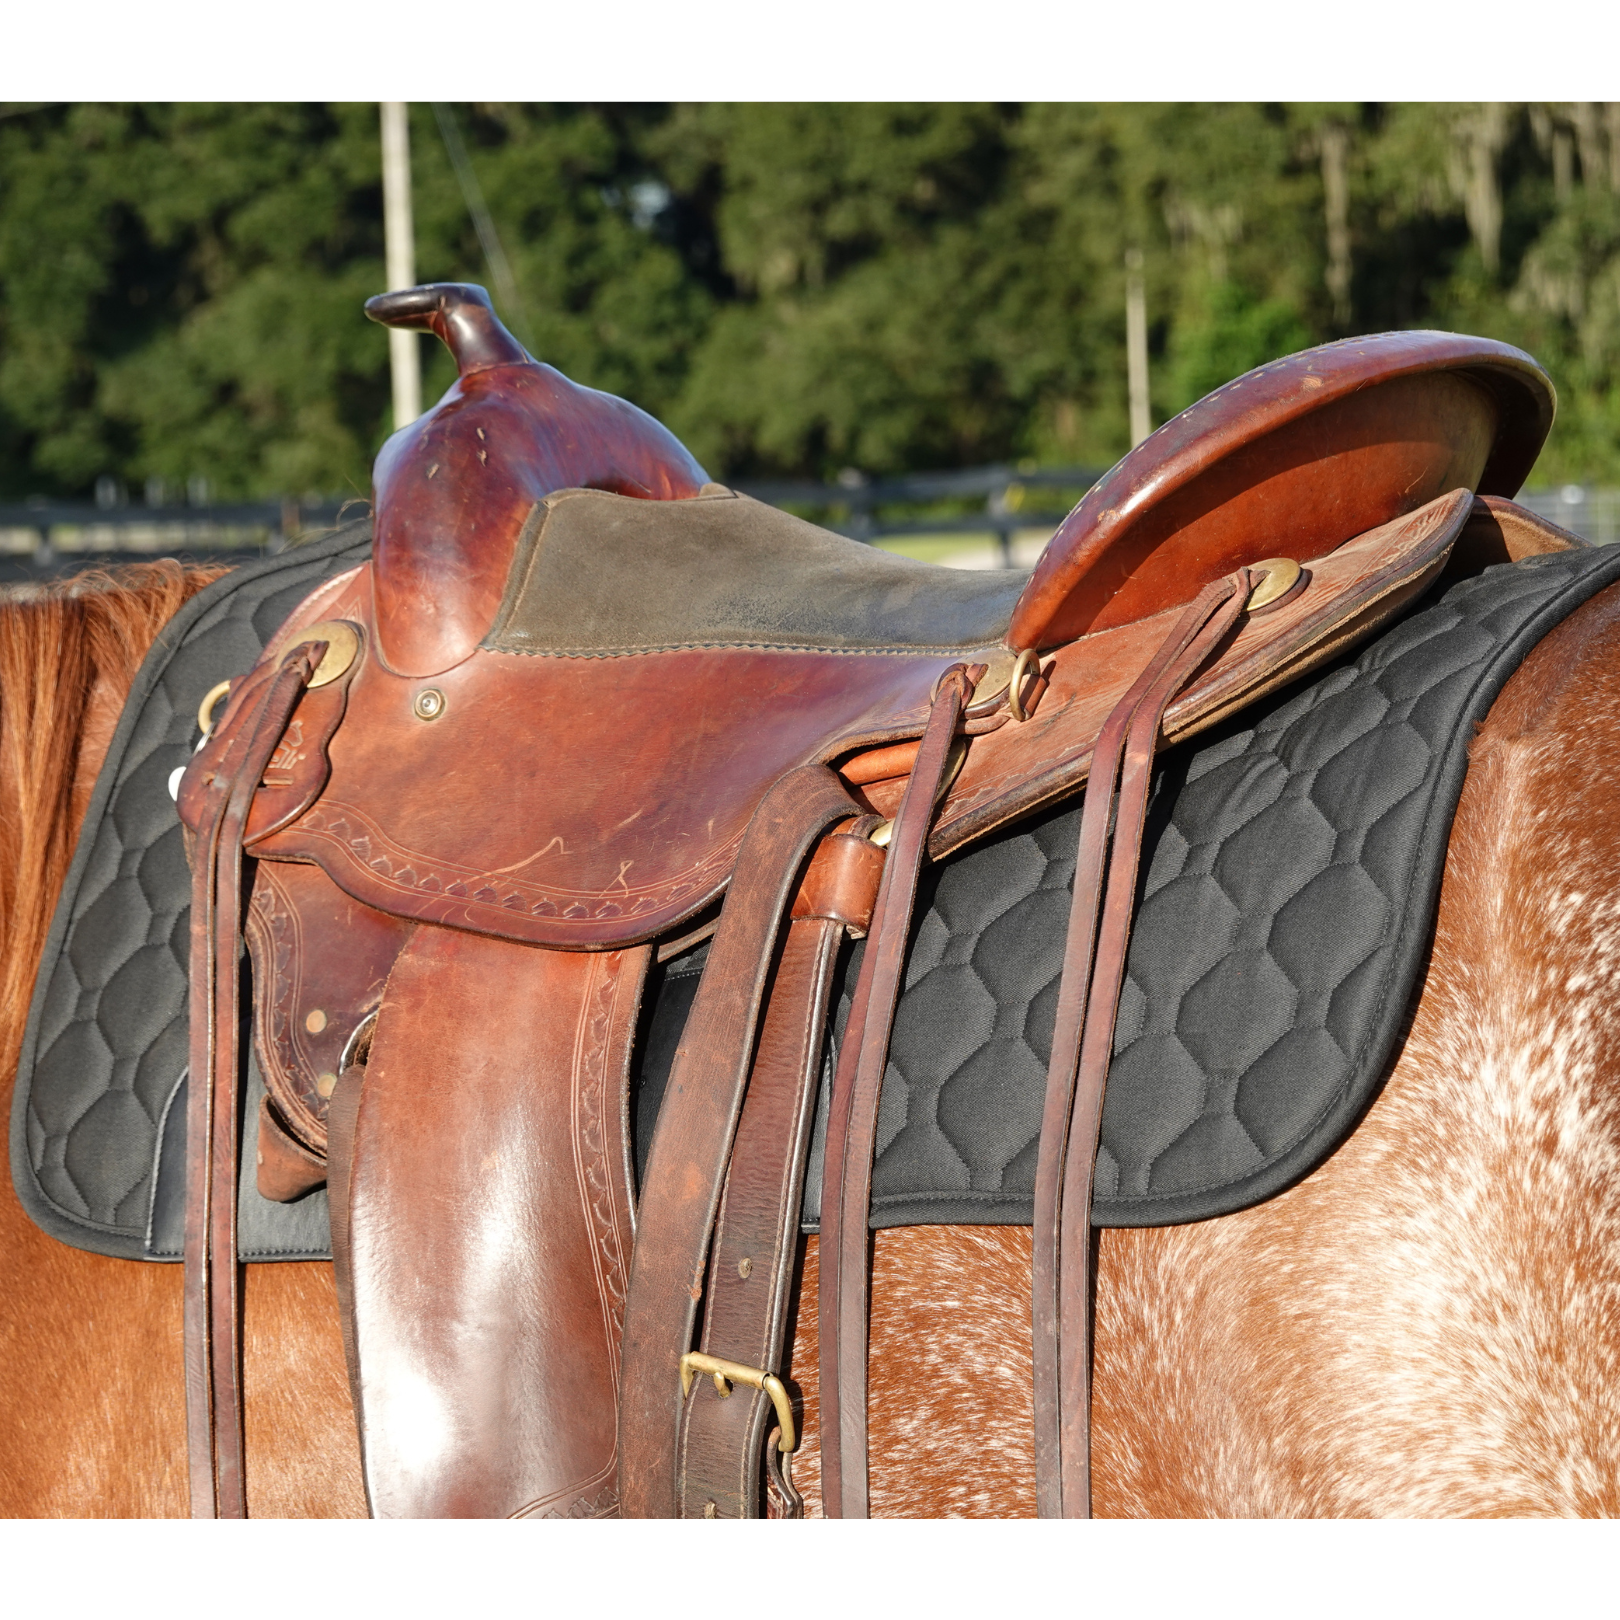 NEW! Therapeutic Western Pad - Benefab®